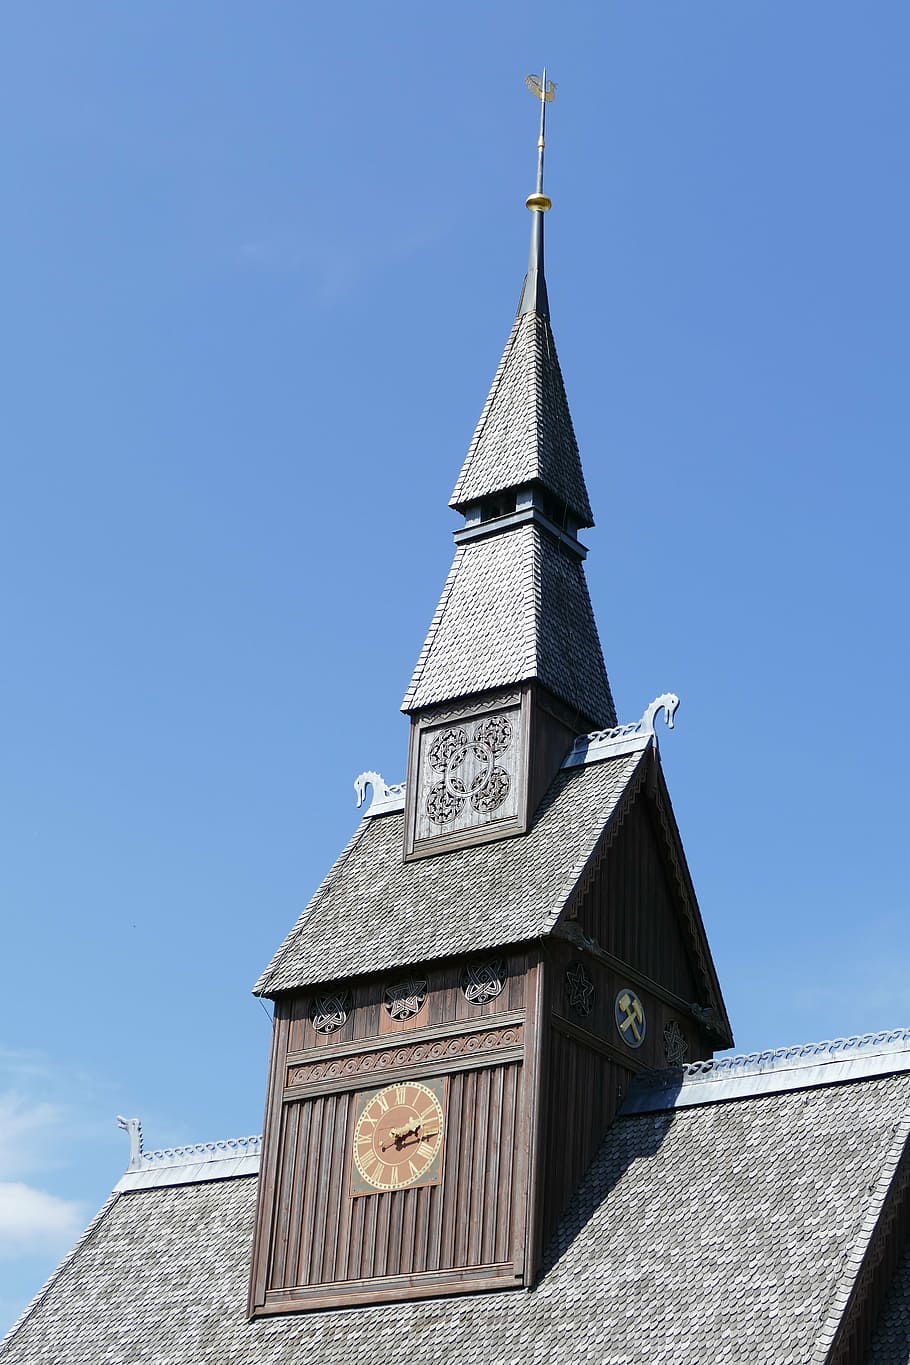 stave church, bell tower, clock tower, roof, goslar-hahnenklee, HD wallpaper